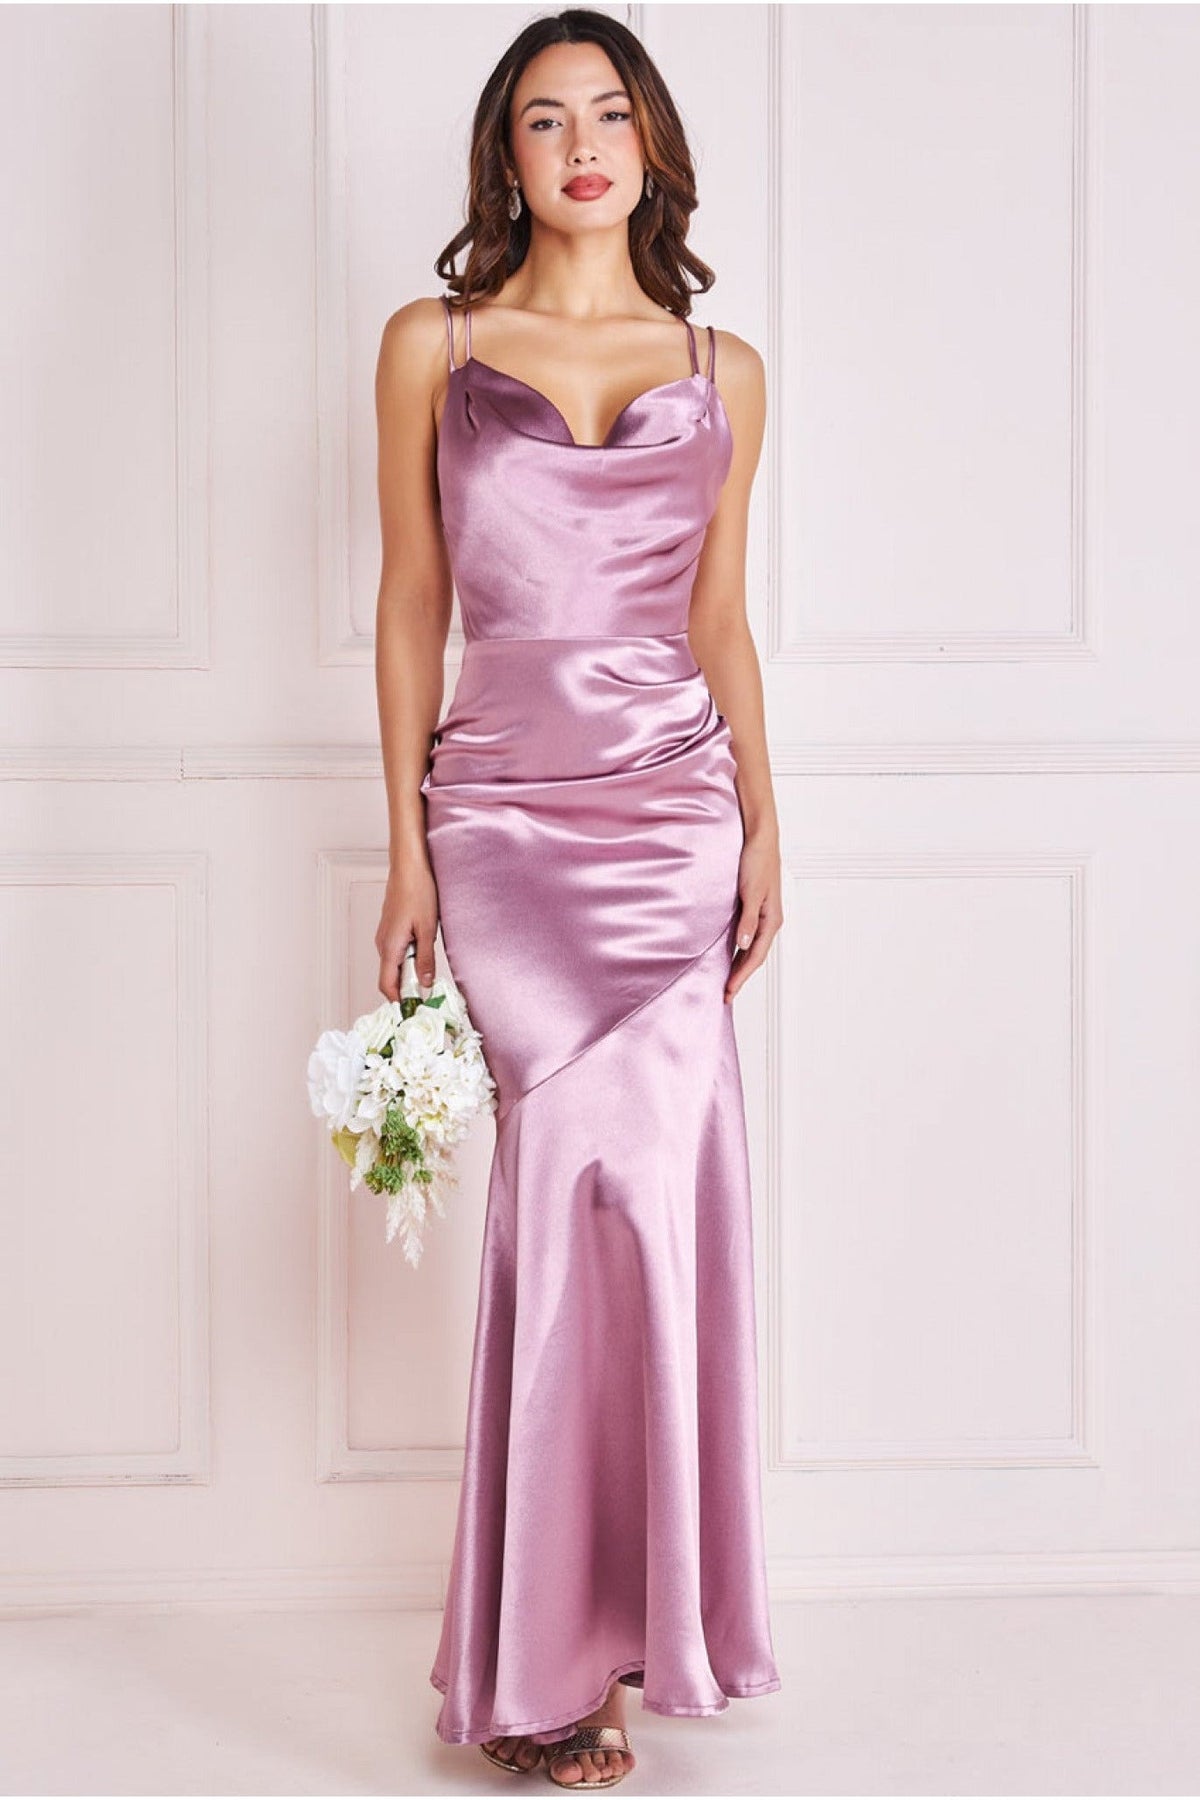 Goddiva Cowl Neck With Strappy Back Satin Maxi - Red - Sale from Yumi UK